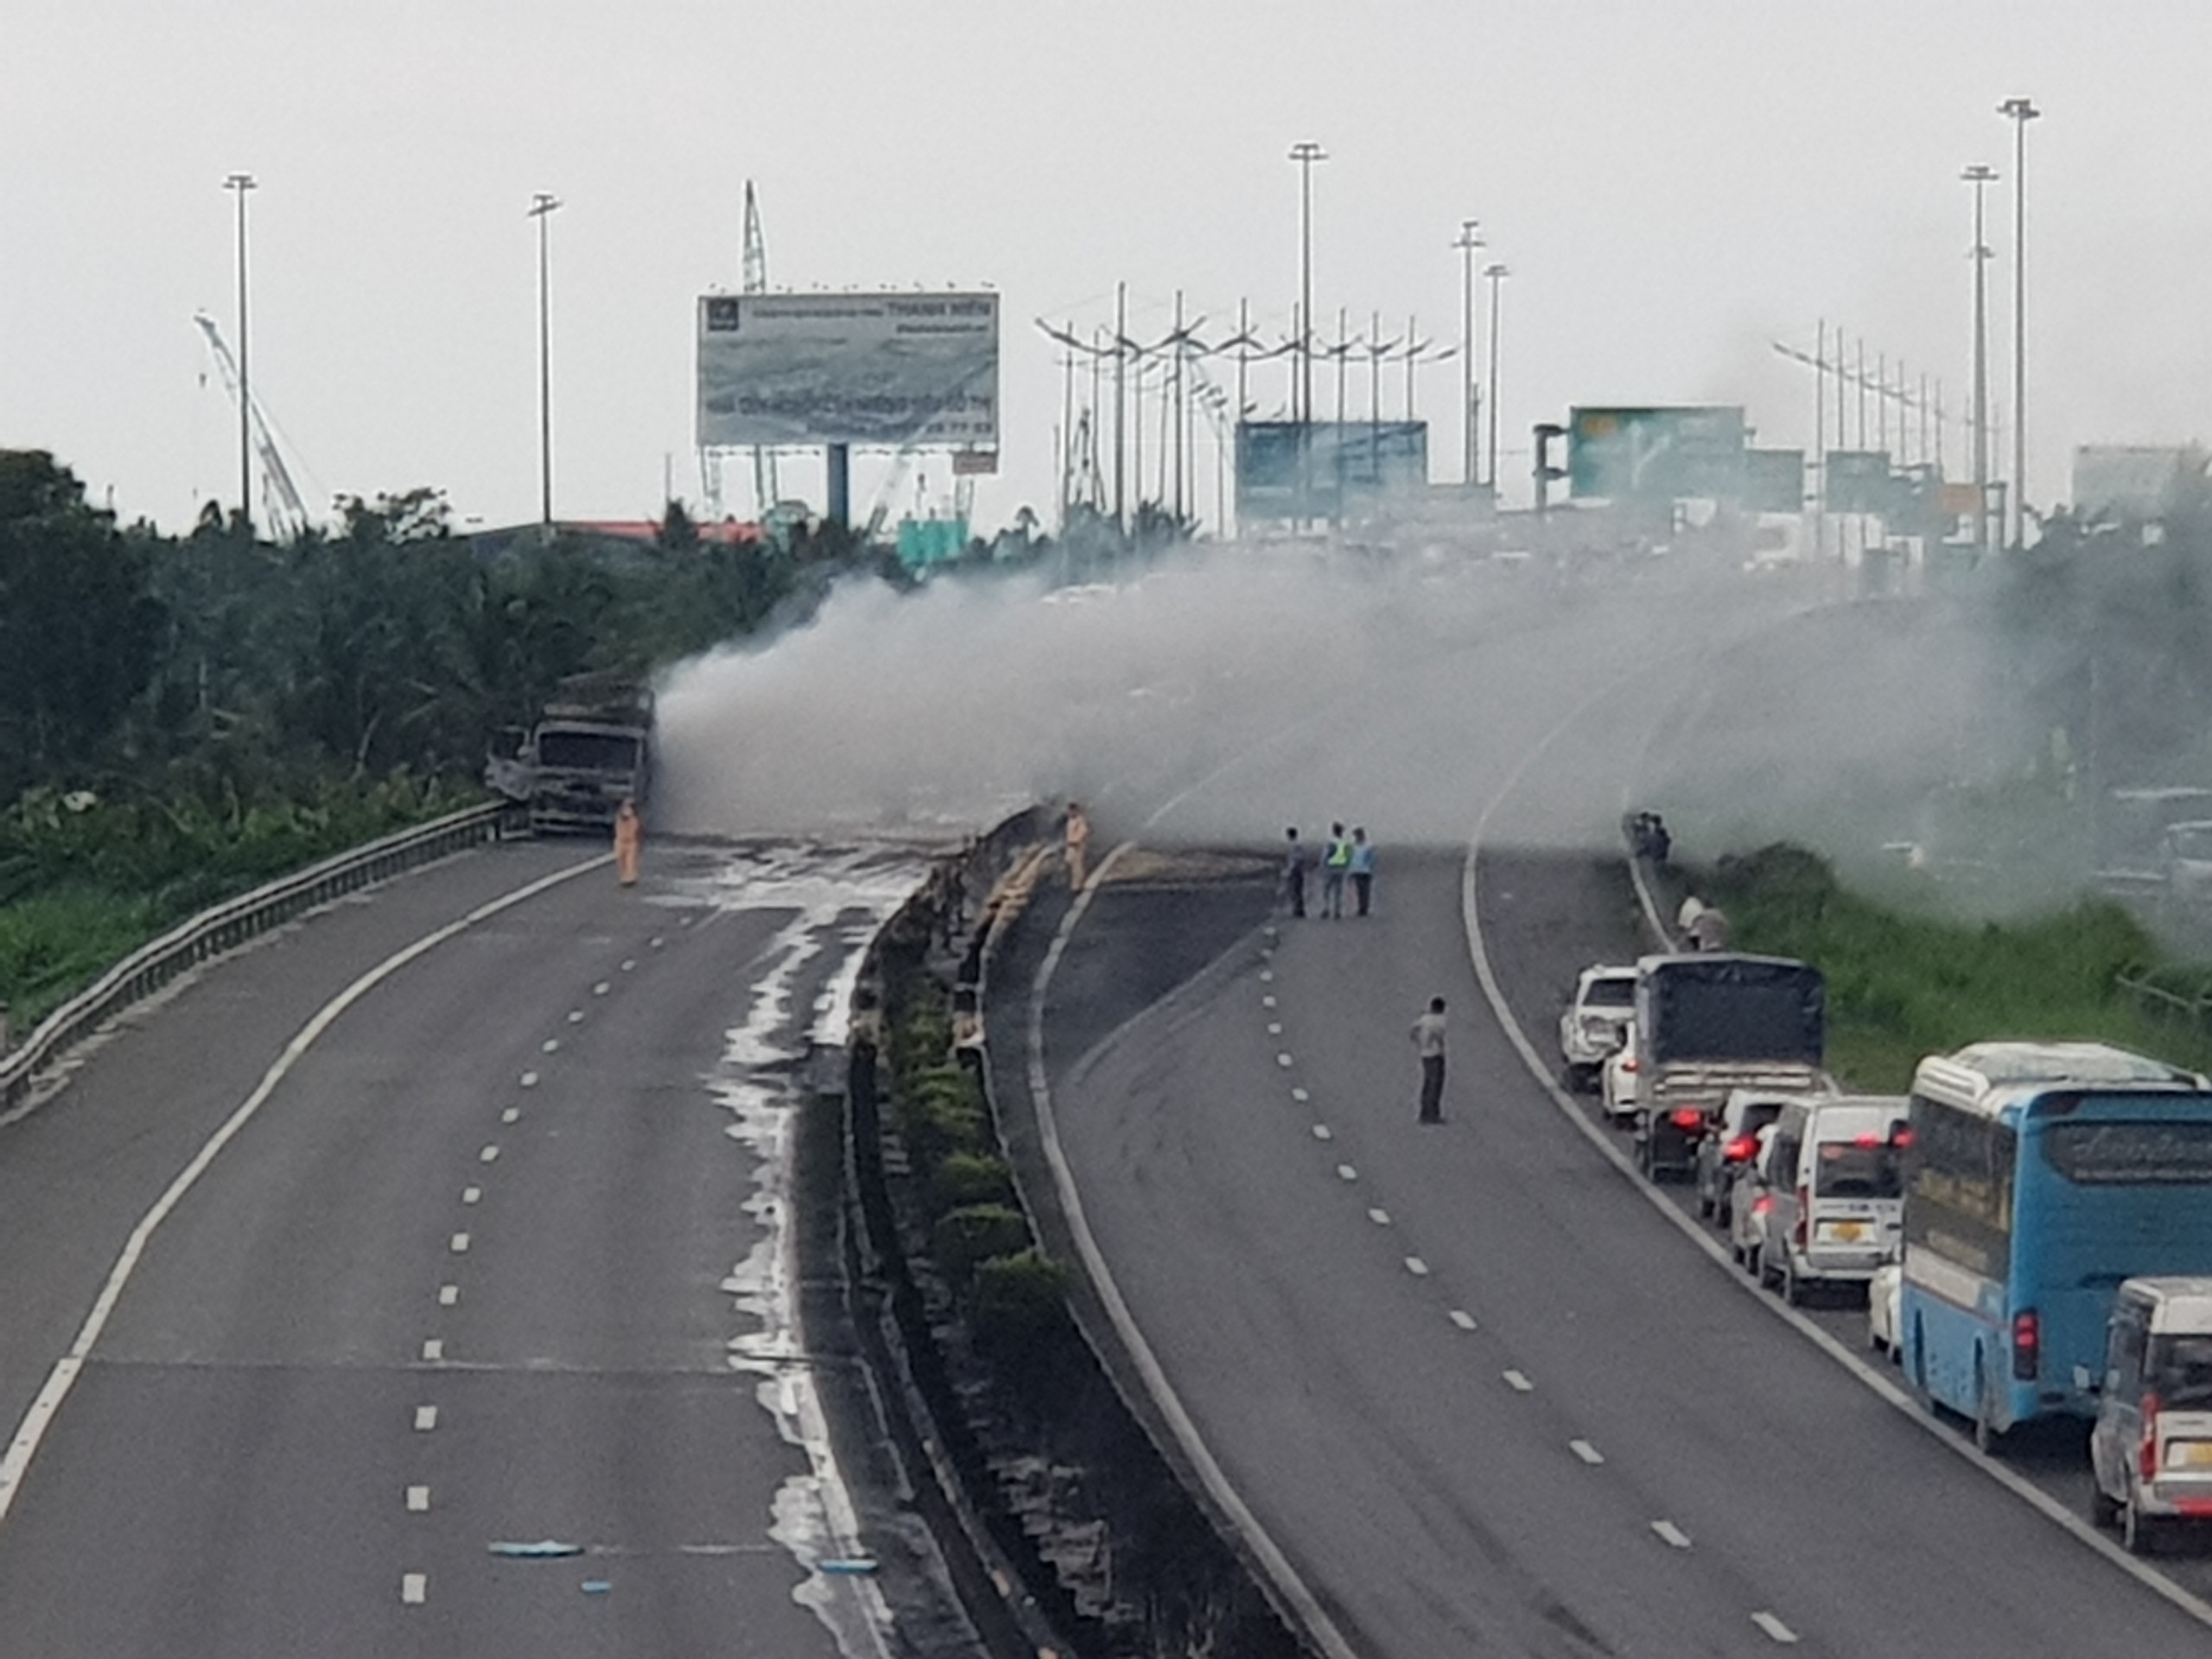 A truck carrying lubricating oil catches fire on the Ho Chi Minh City-Trung Luong Expressway, May 4, 2022. Photo: Son Lam / Tuoi Tre